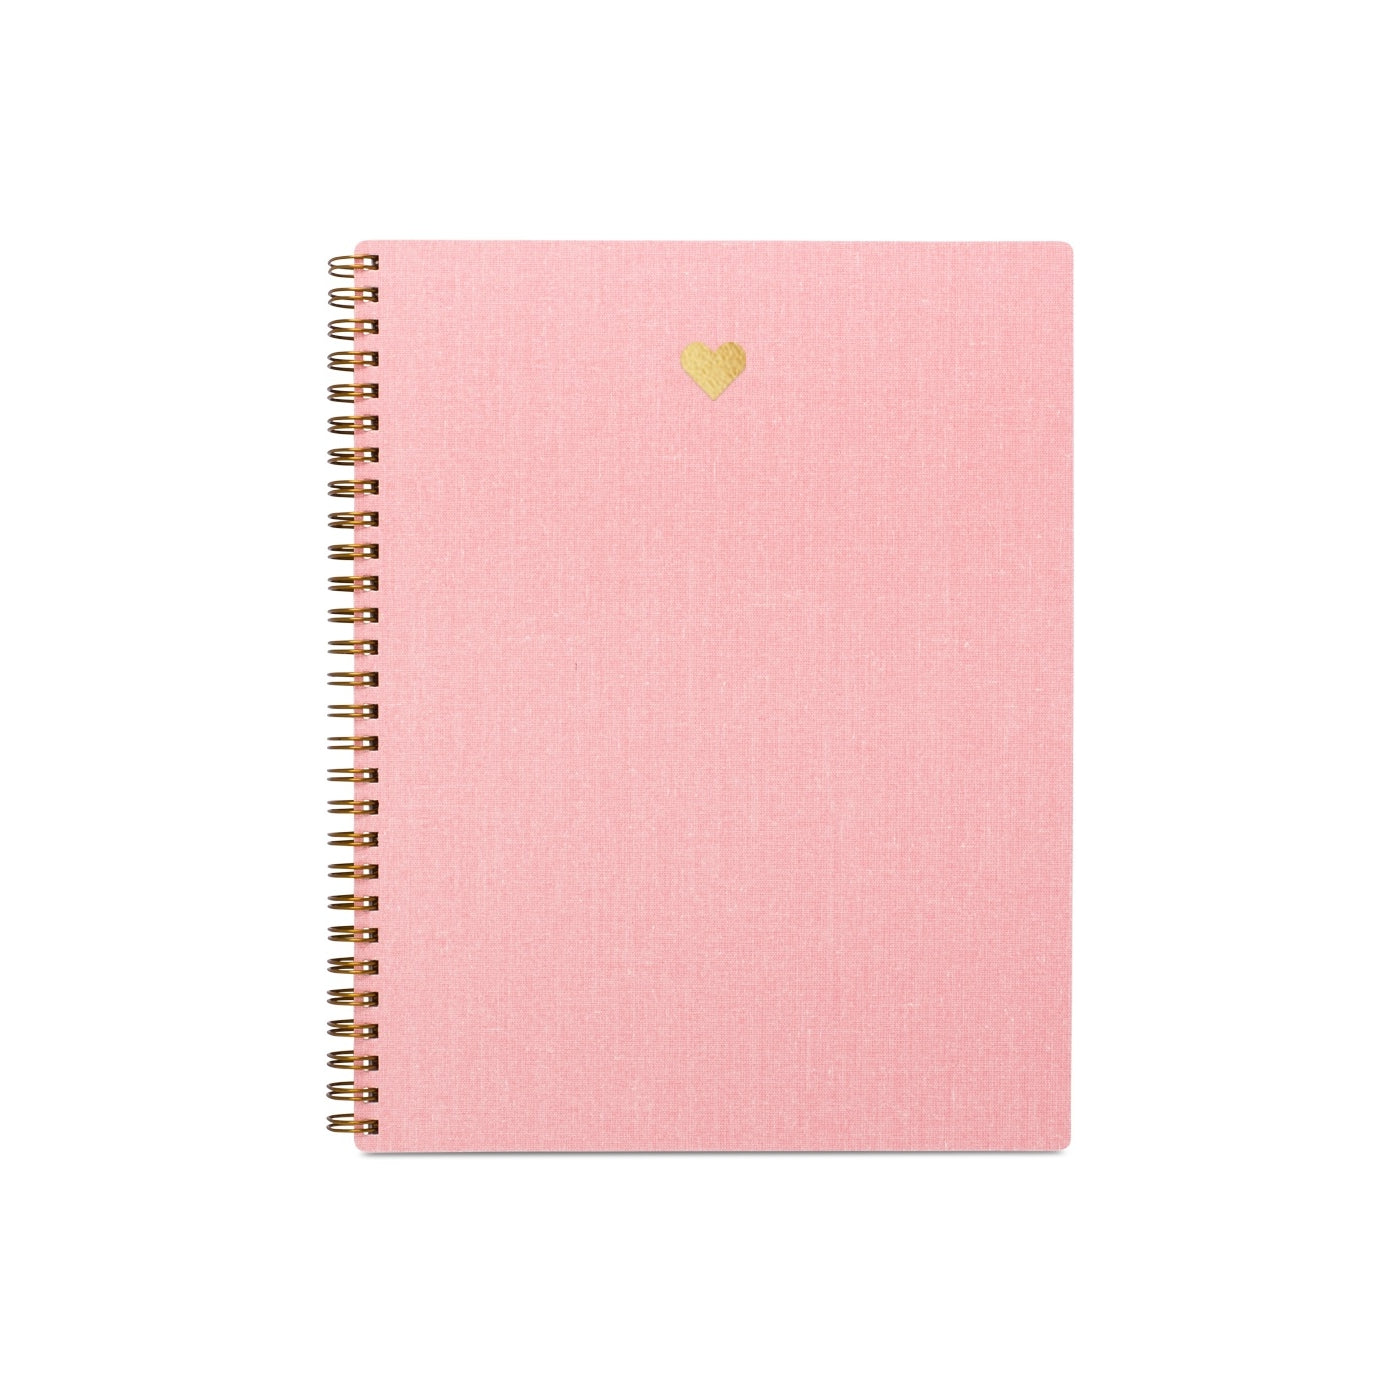 Appointed Coiled Notebook Lined - Blossom Pink With Heart